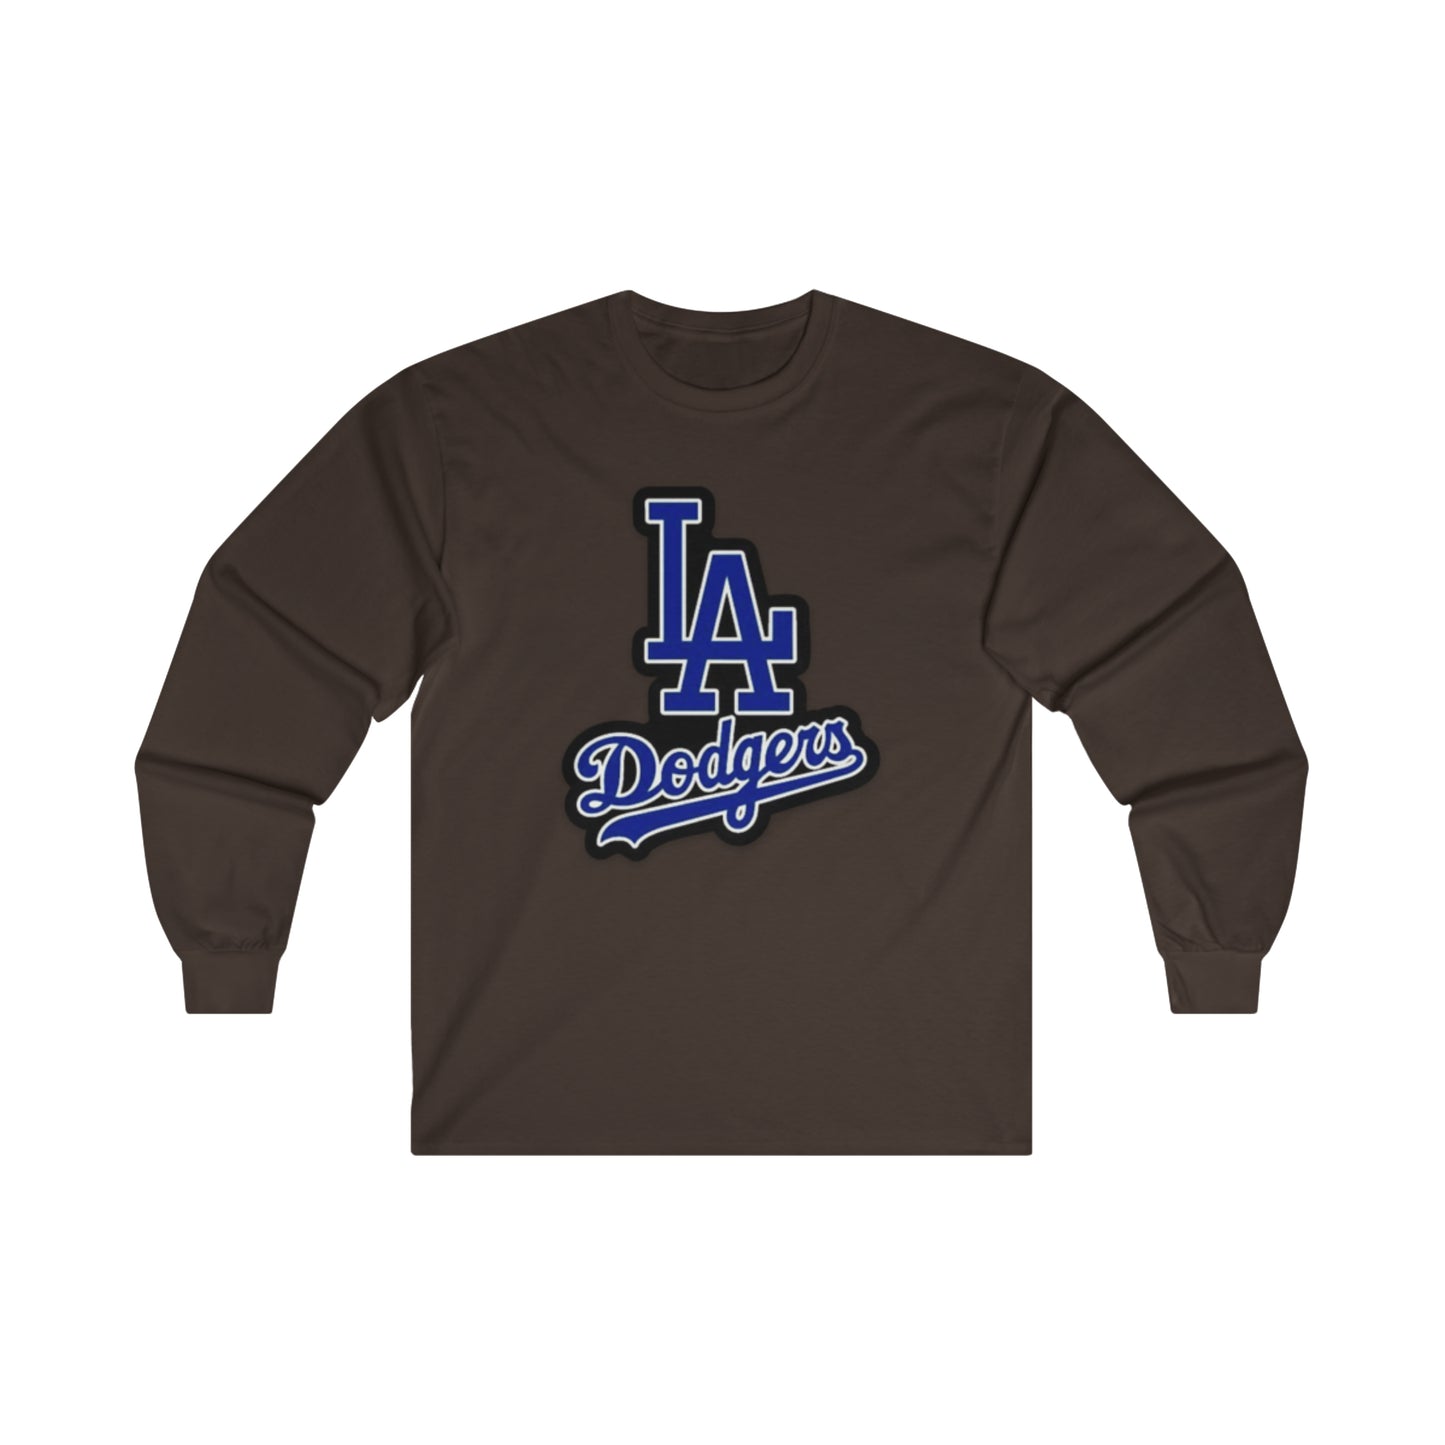 Los Angeles Dodgers - Ultra Cotton Long Sleeve Tee